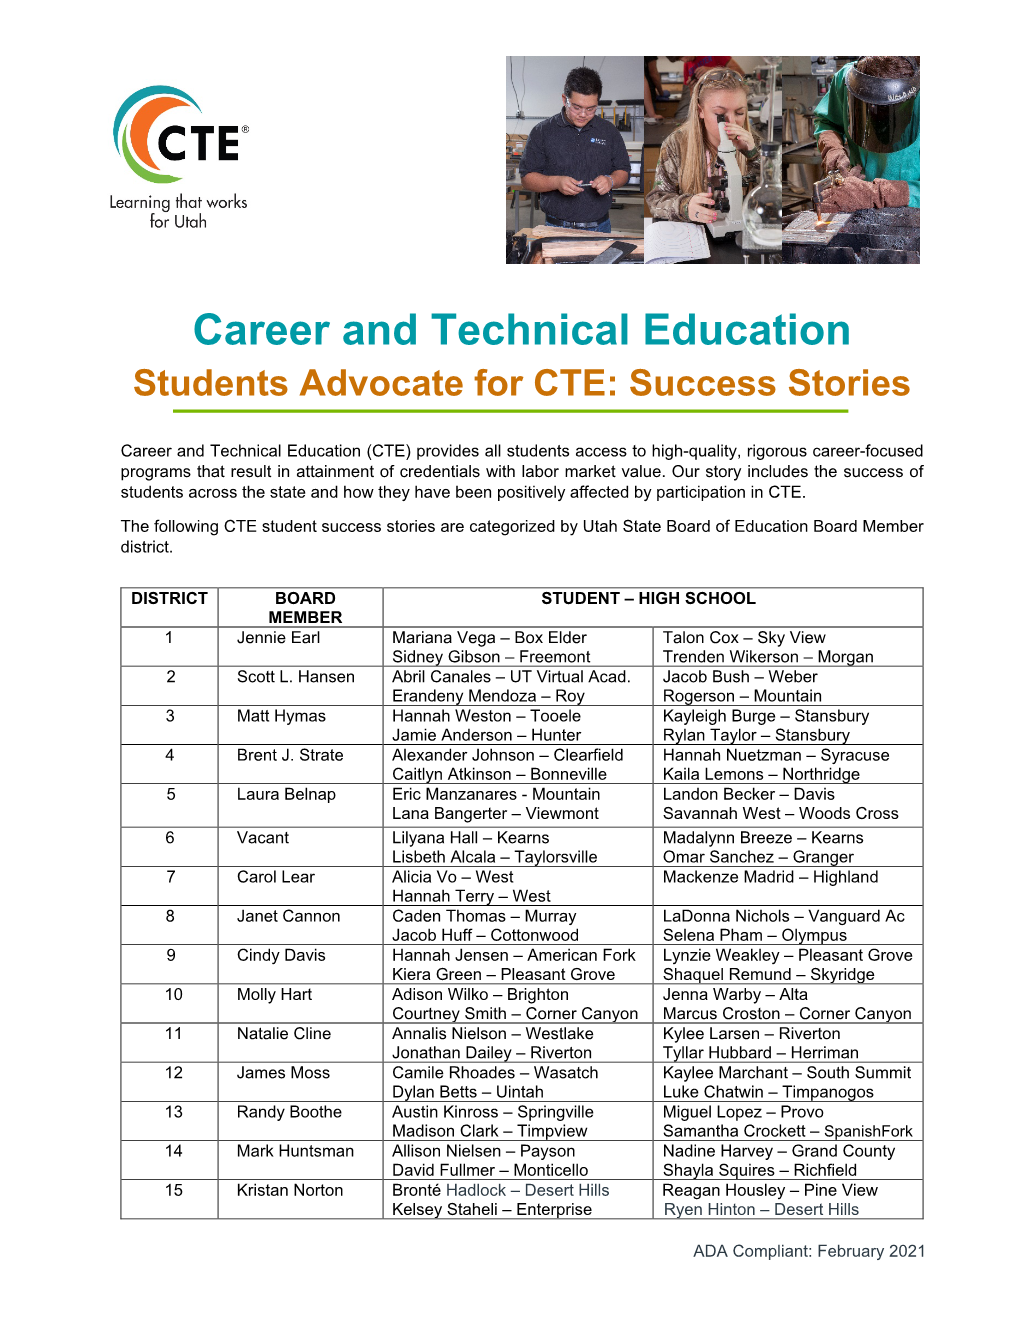 Students Advocate for CTE: Success Stories